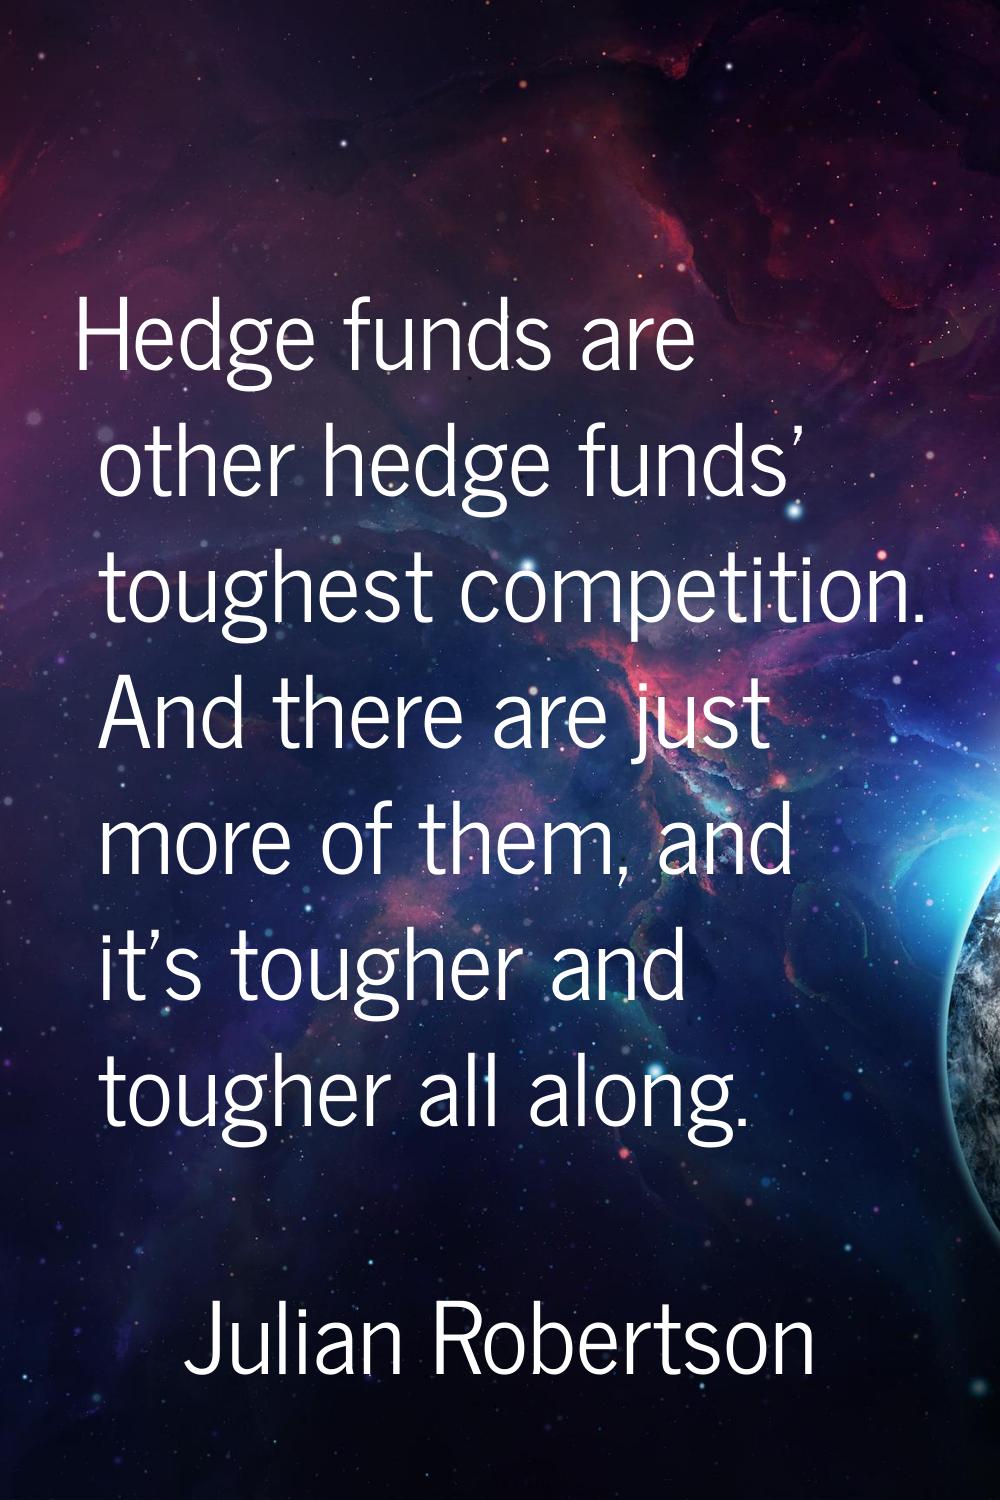 Hedge funds are other hedge funds' toughest competition. And there are just more of them, and it's 